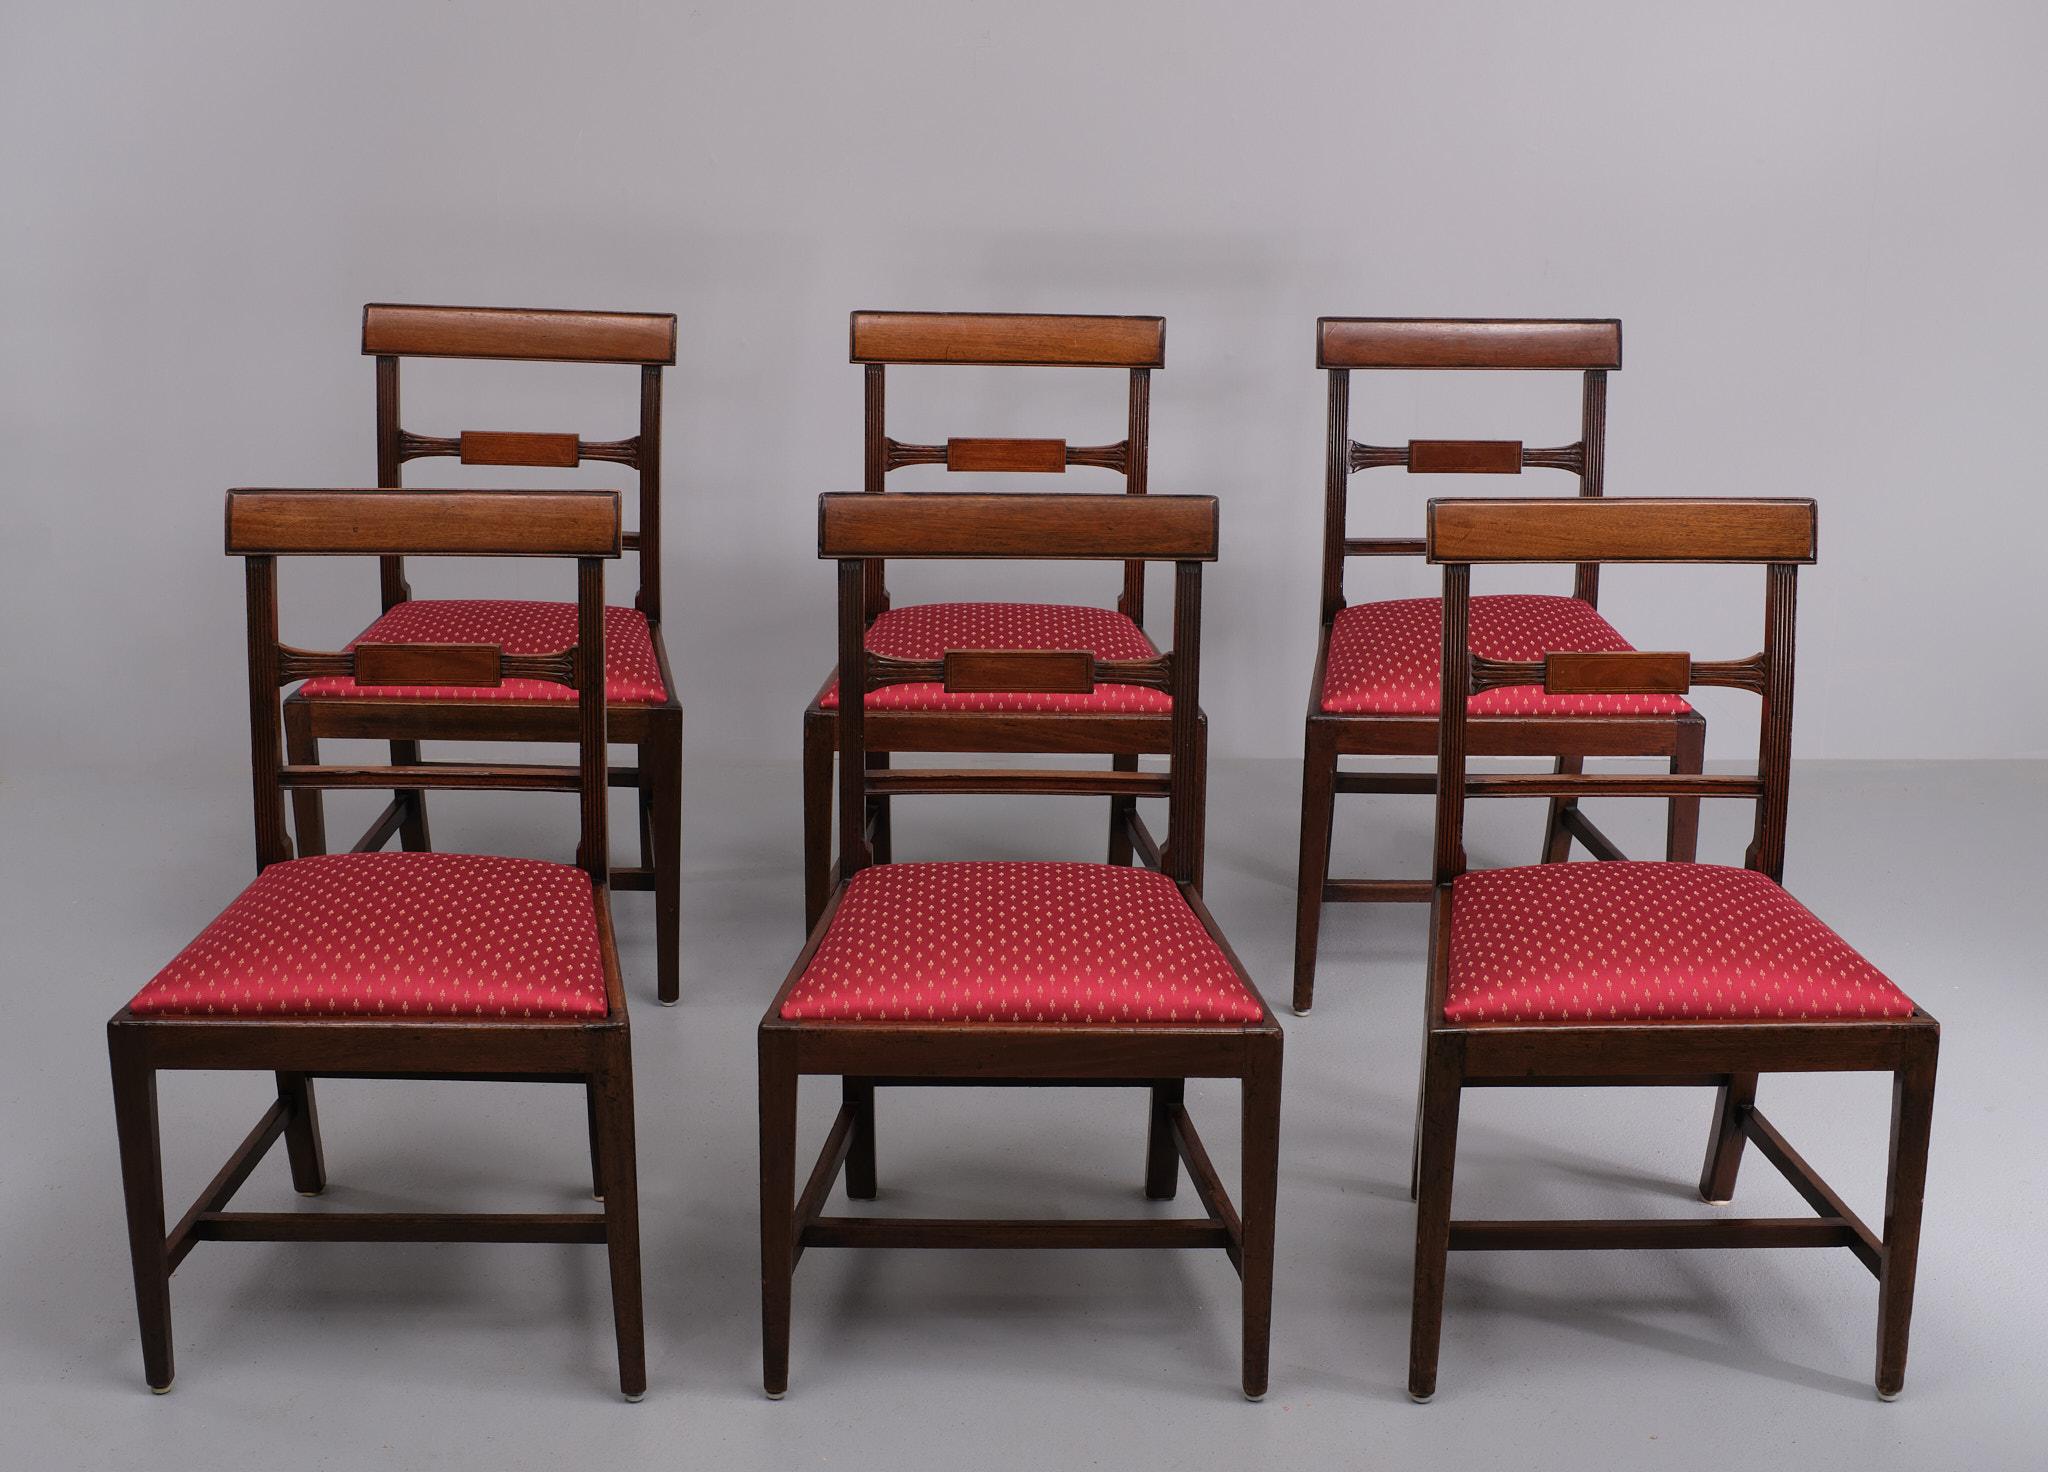 Antique Regency Dining chairs  1850s England  In Good Condition For Sale In Den Haag, NL